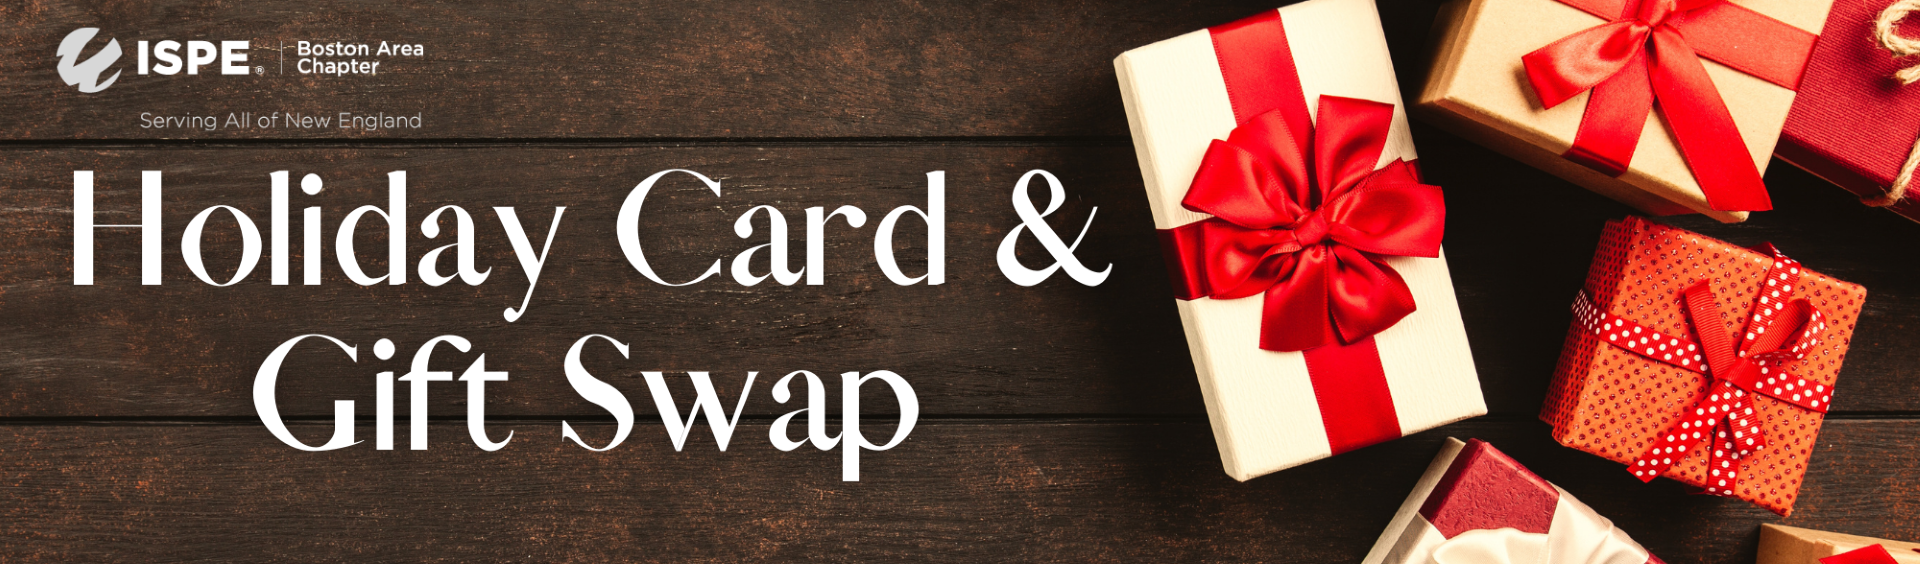 Holiday Gift Swap